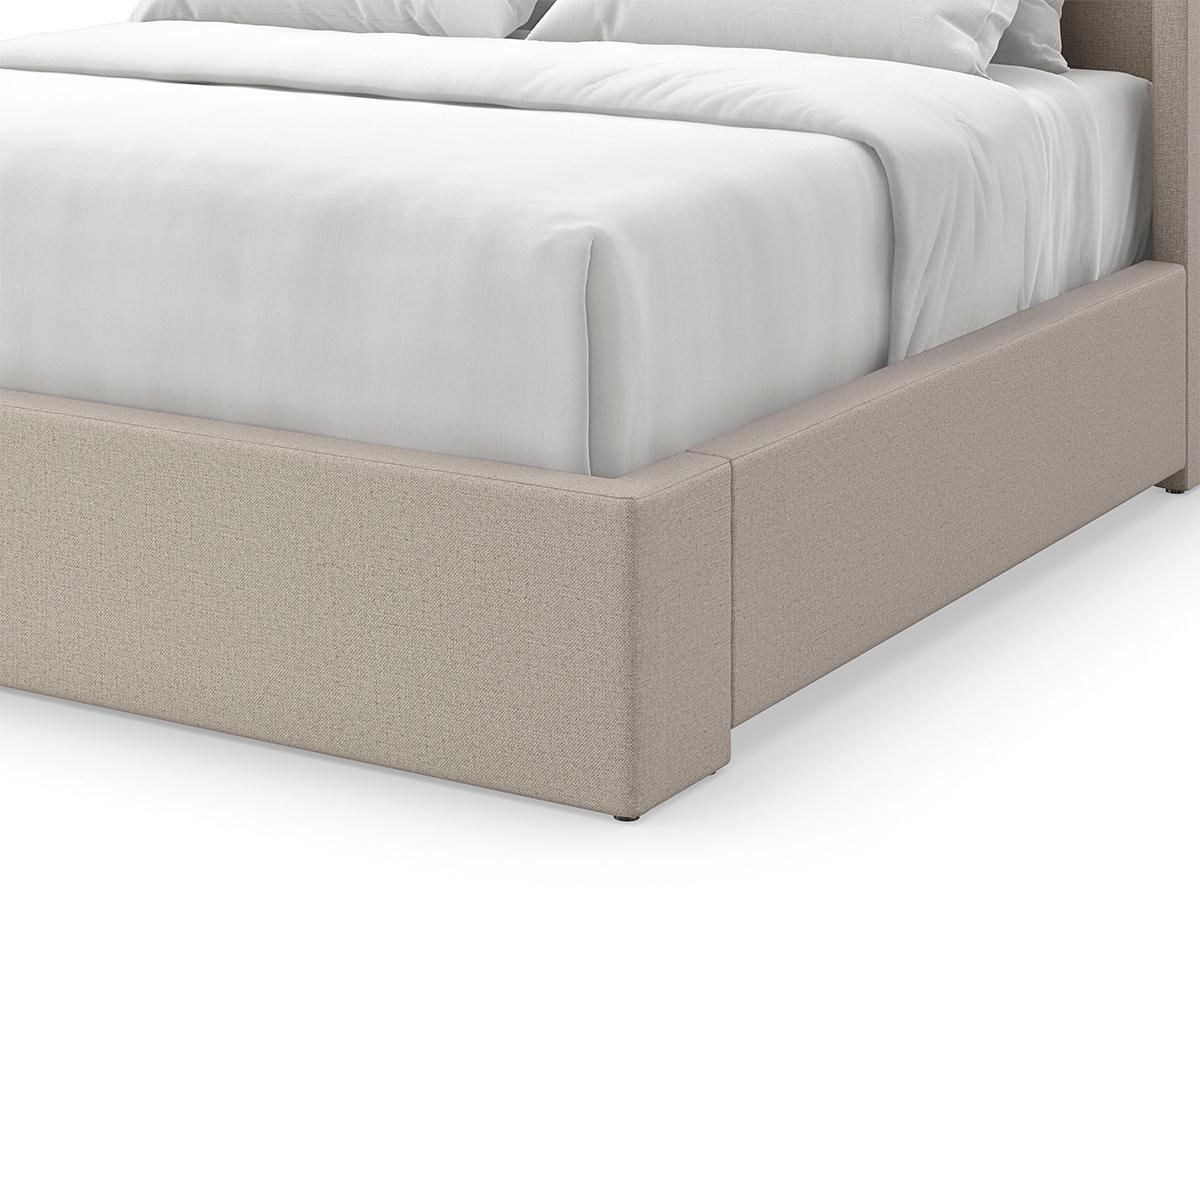 Flared Modern Fully Upholstered Queen Bed - Oatmeal In New Condition For Sale In Westwood, NJ